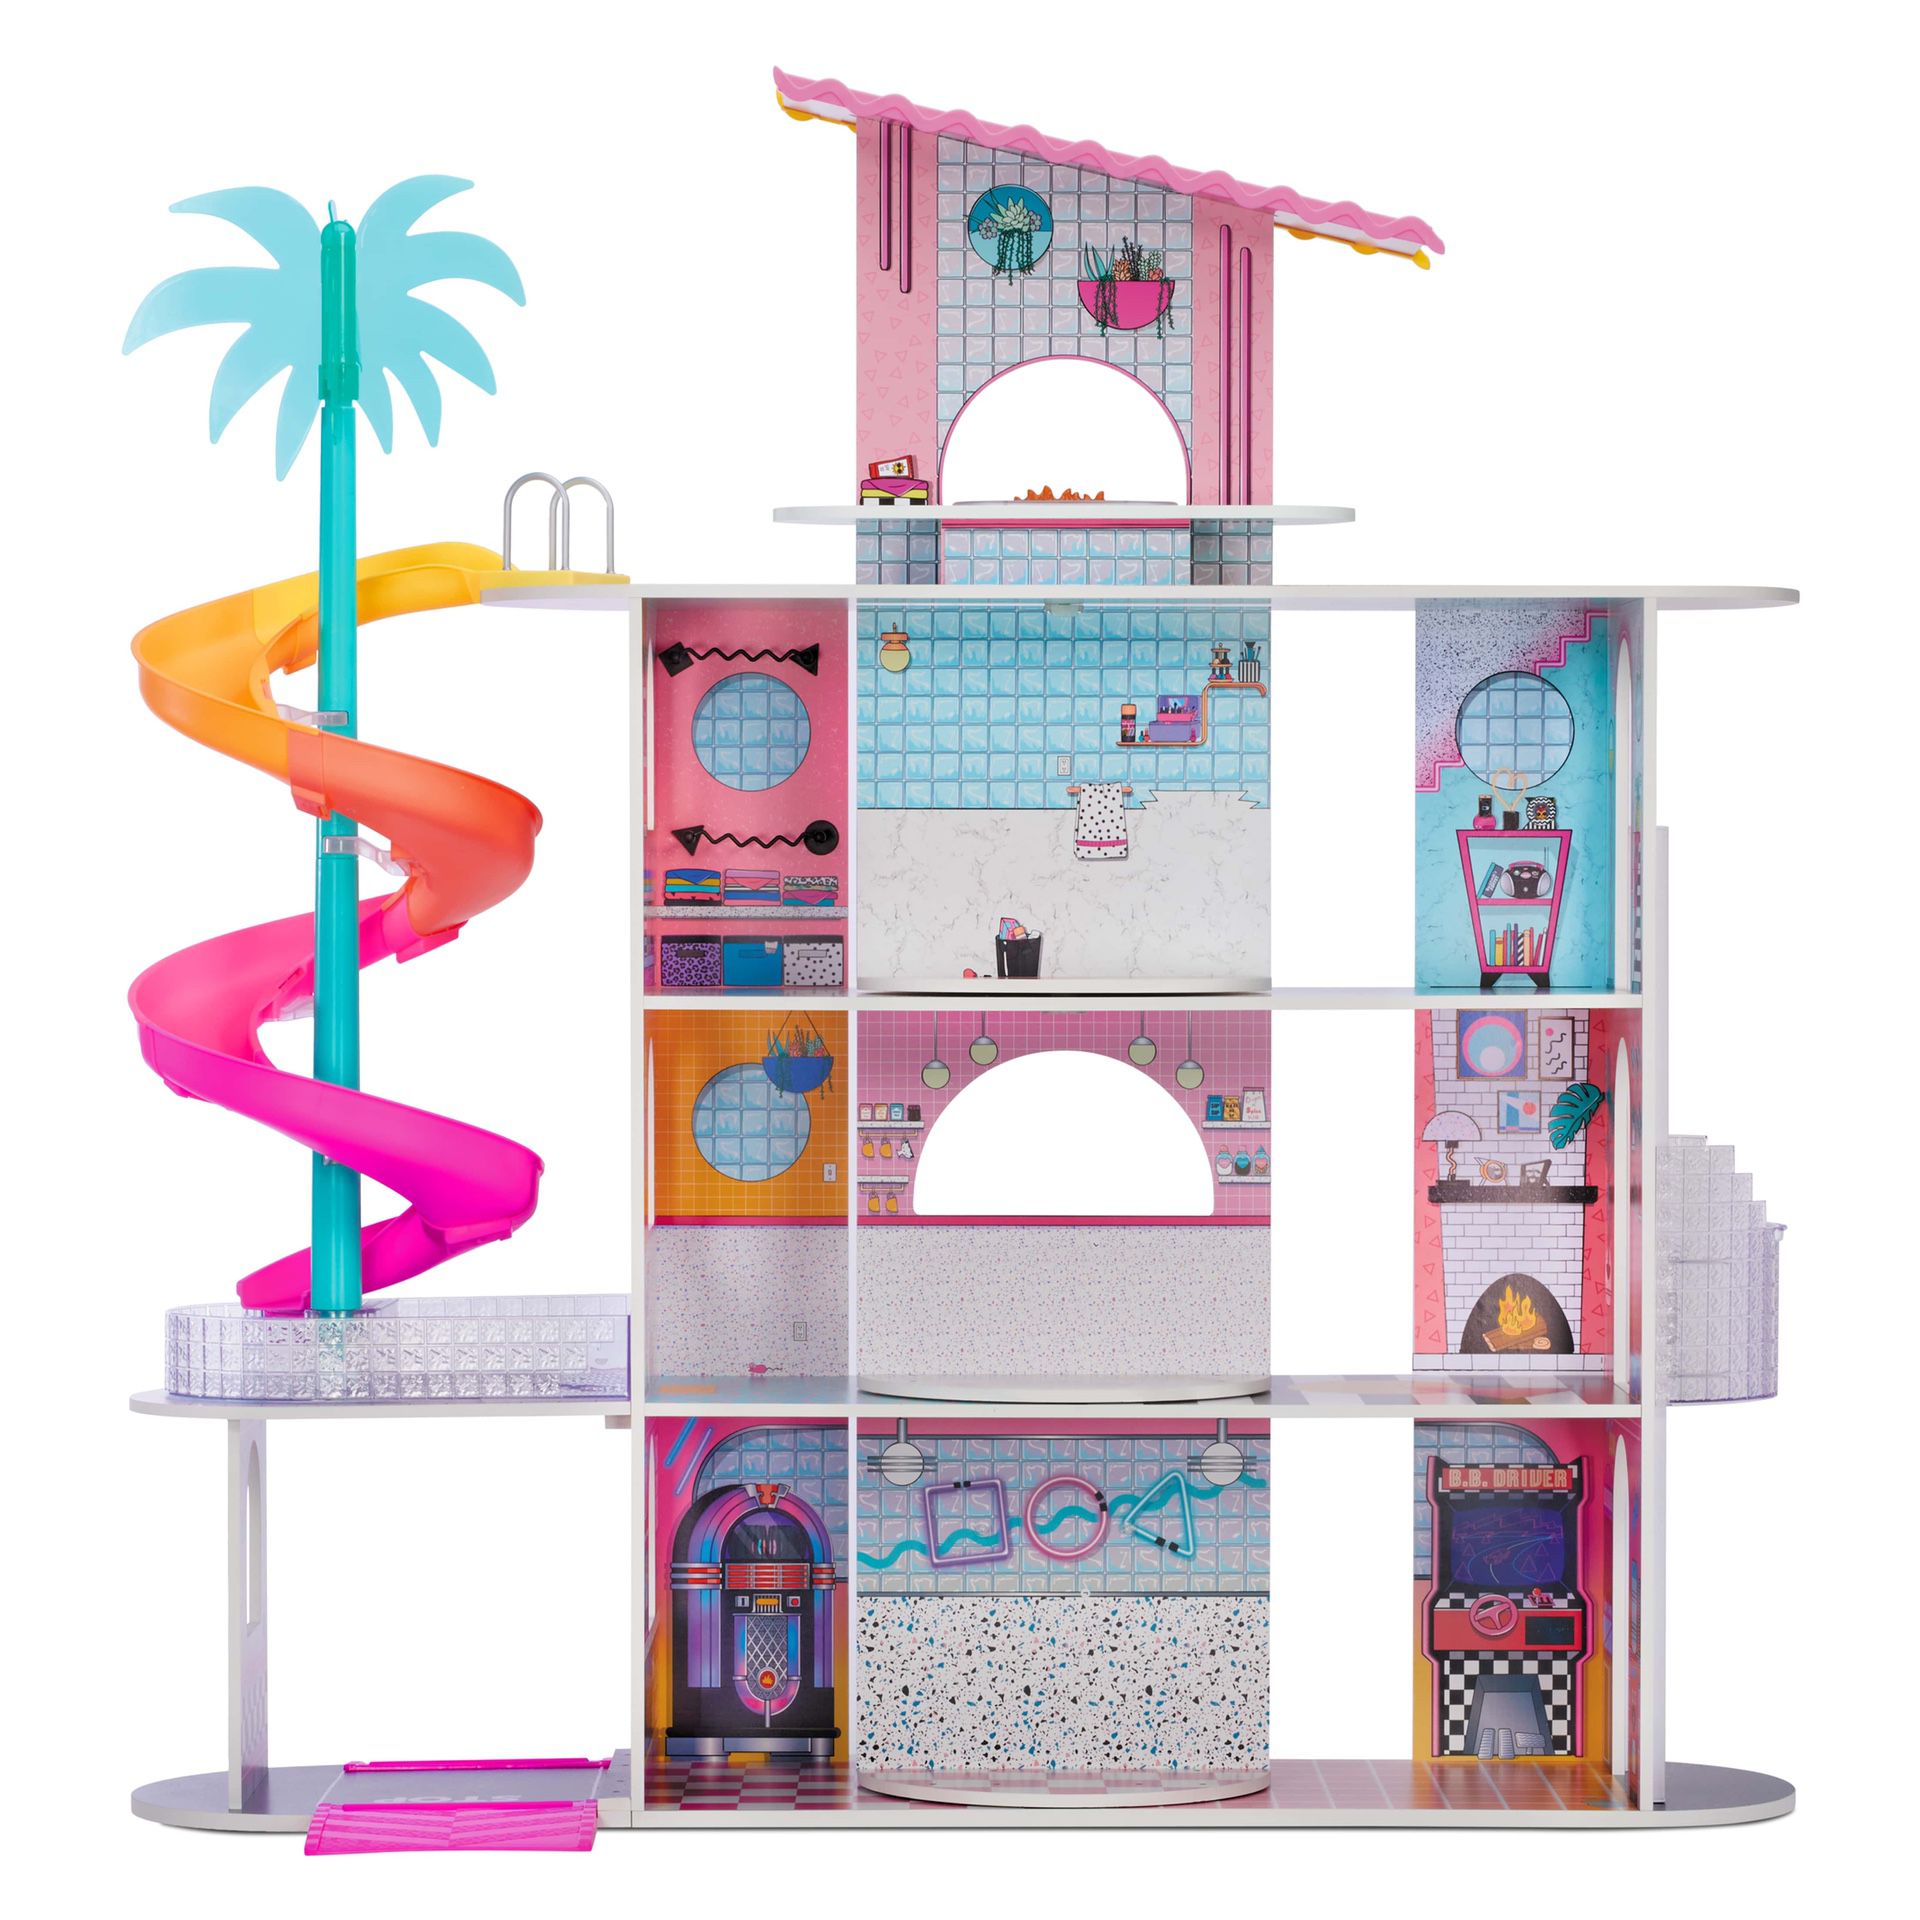 Lol Surprise Omg House Of Surprises New Real Wood Dollhouse 85+ Surprises 4 Floors Doll House 10 Rooms With Elevator Spiral Slide Pool Movie Theater D